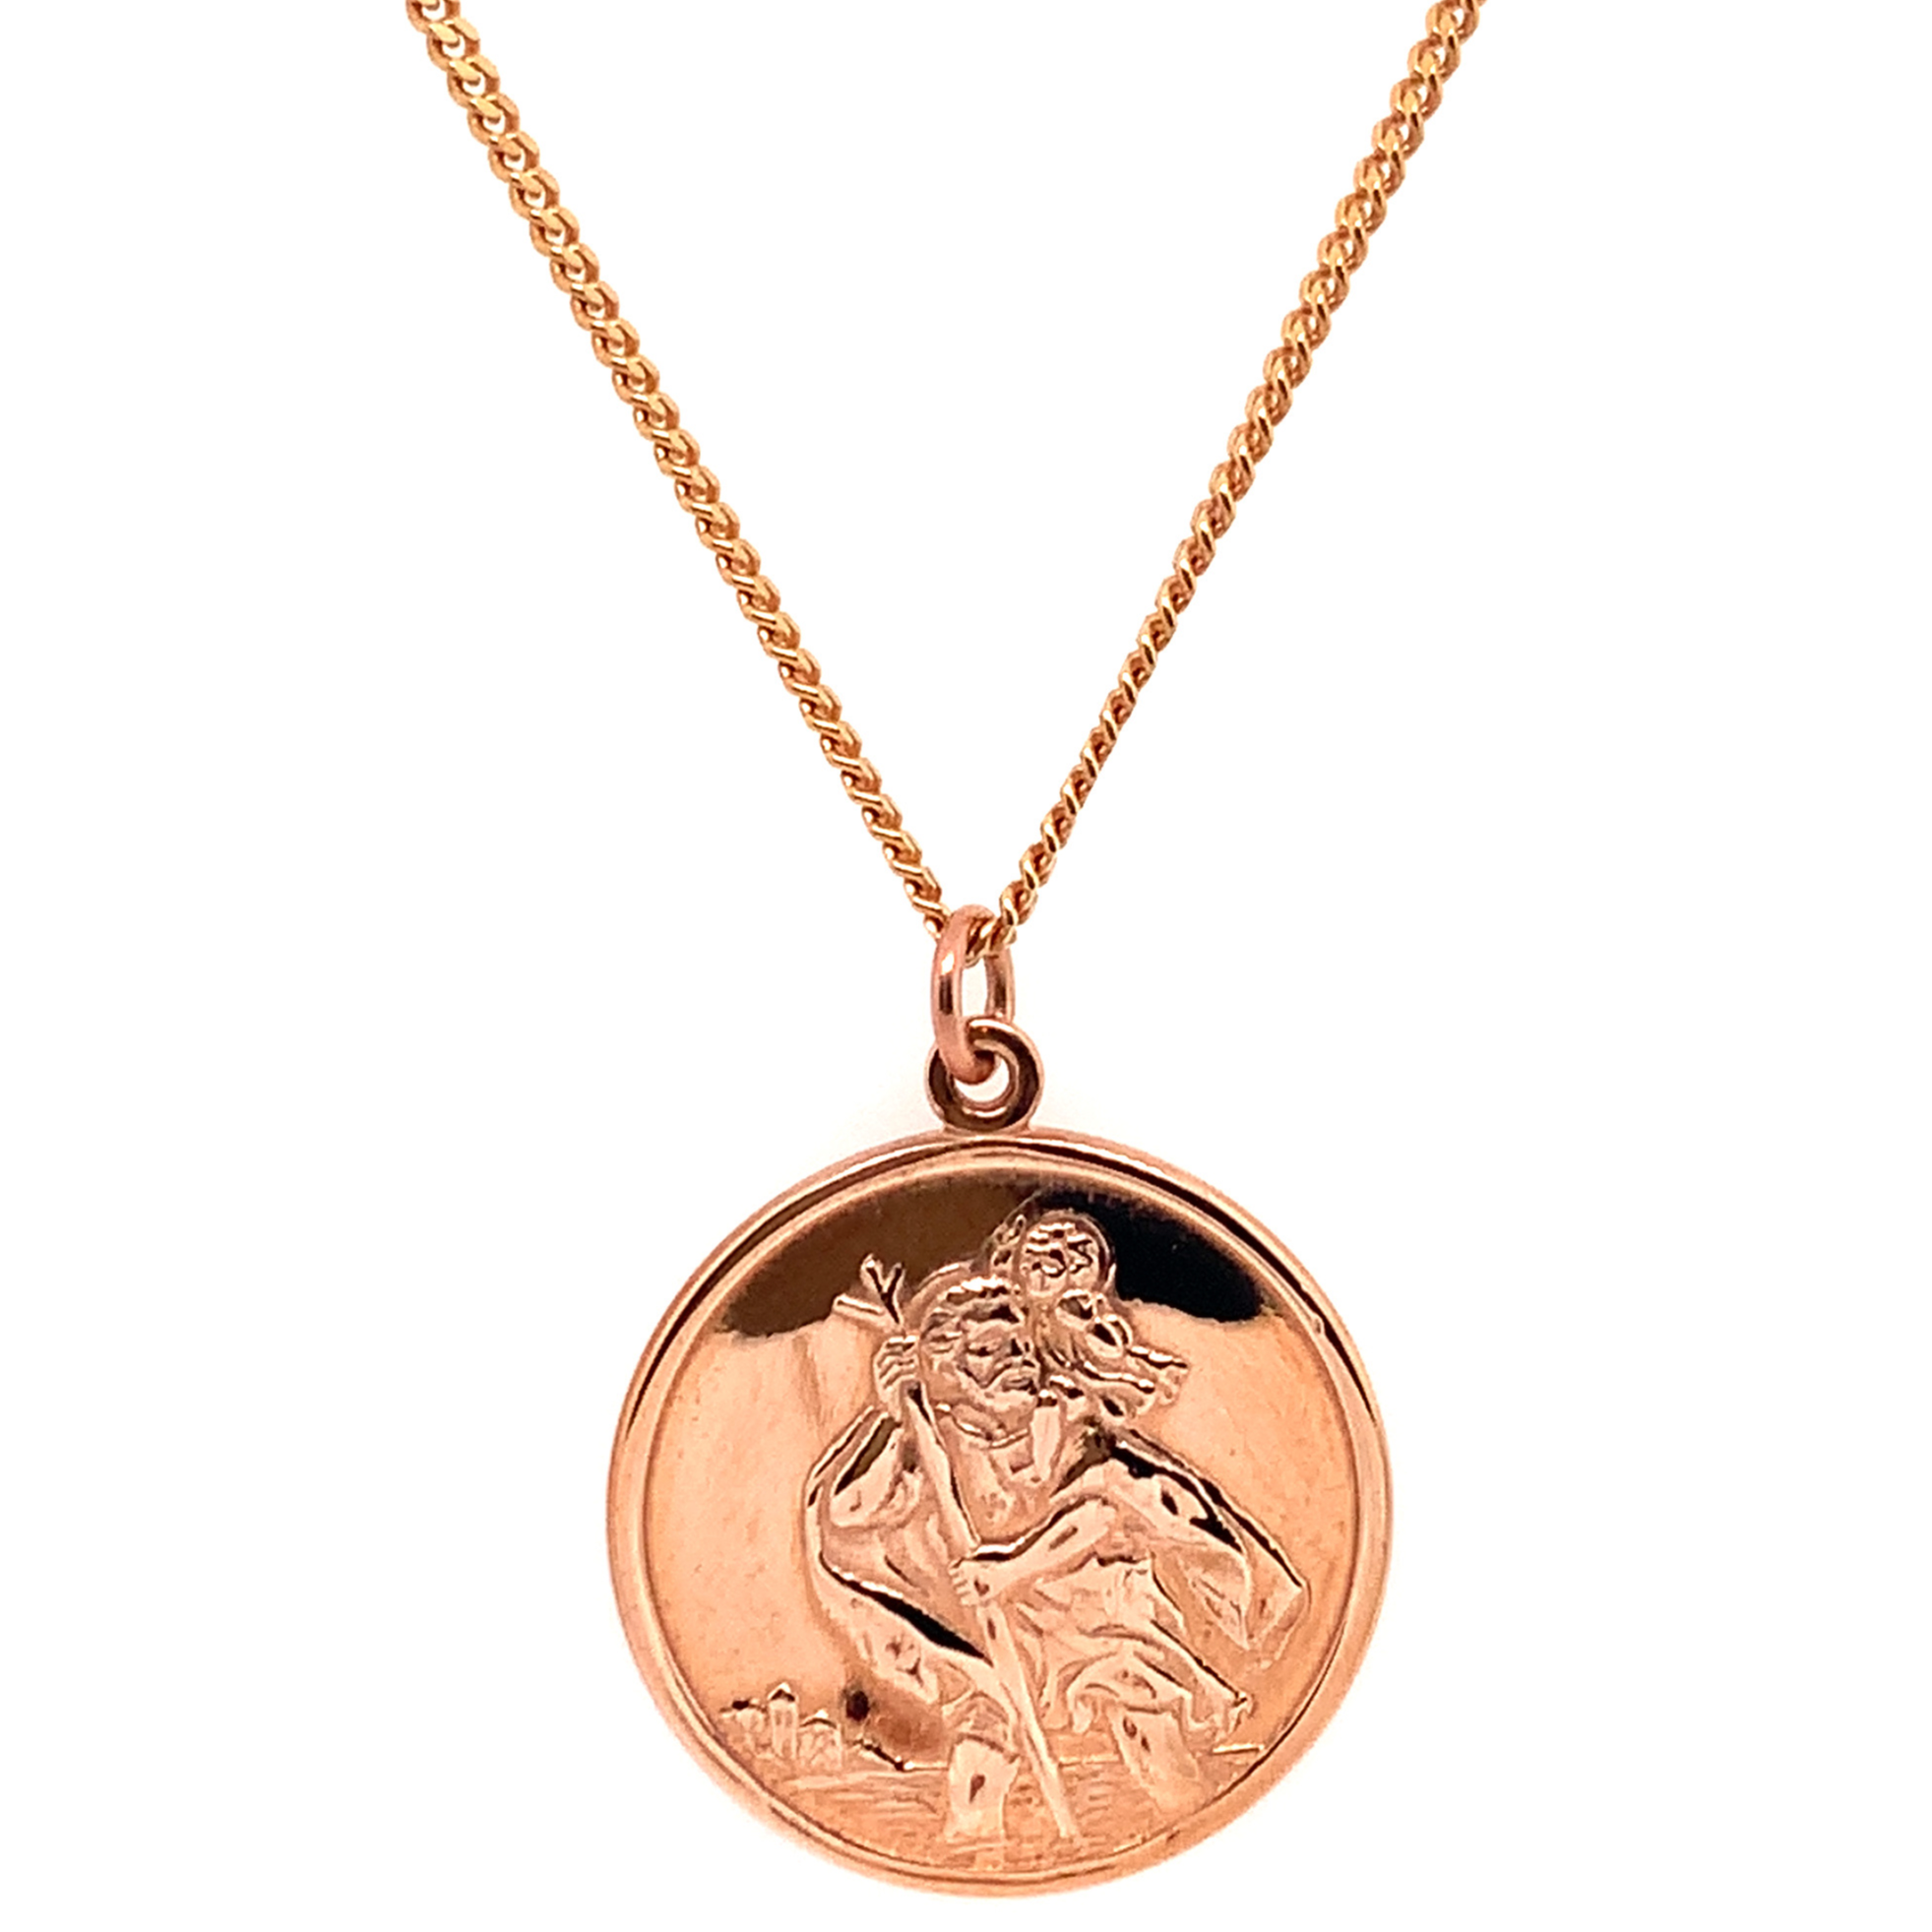 Gold St. Christopher Pendant | Great Value on Gold Diamonds and Gemstones